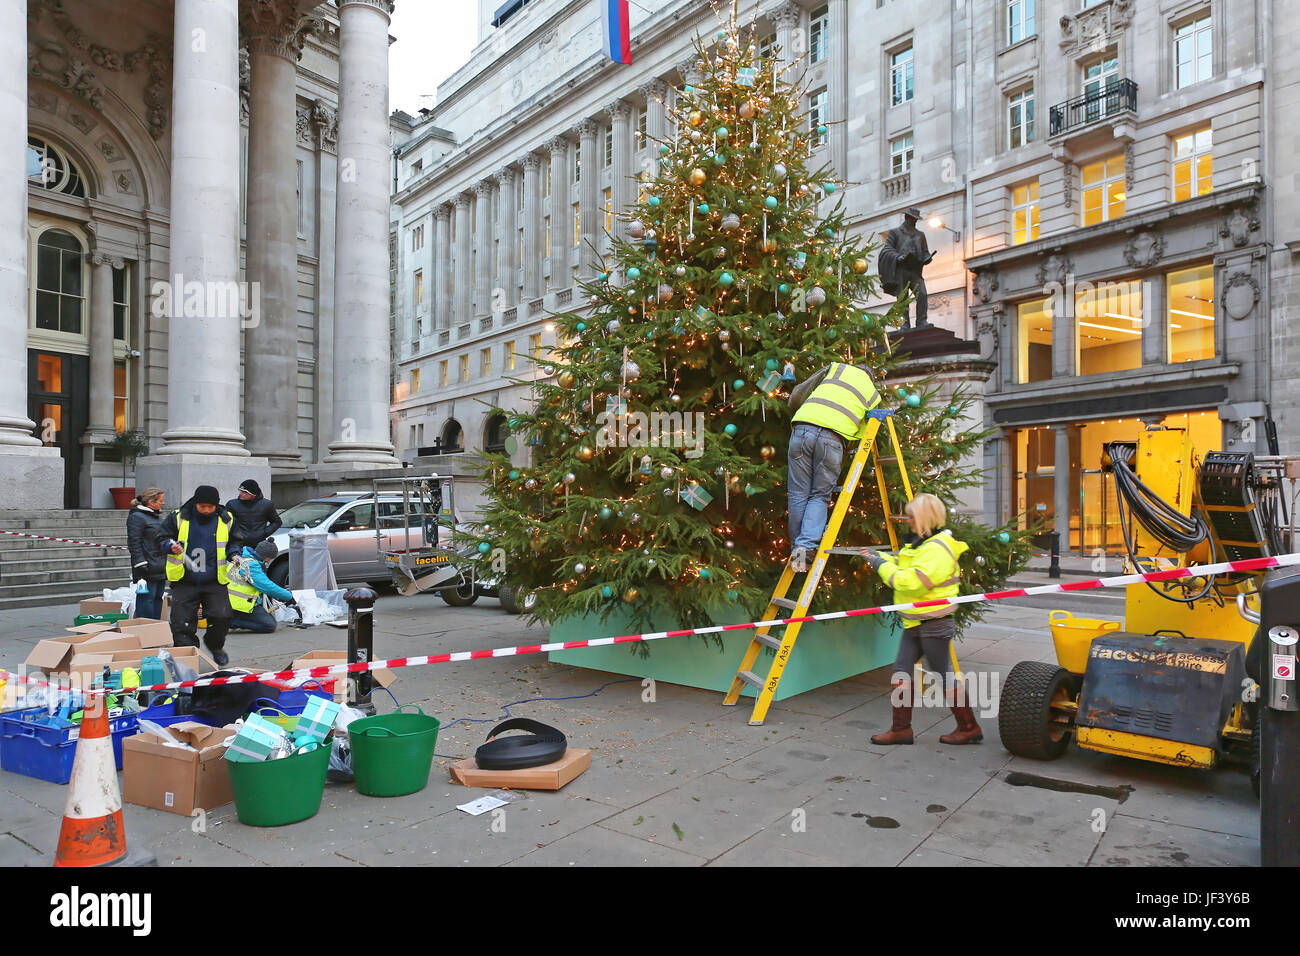 Decorating Christmas Tree in City Stock Photo